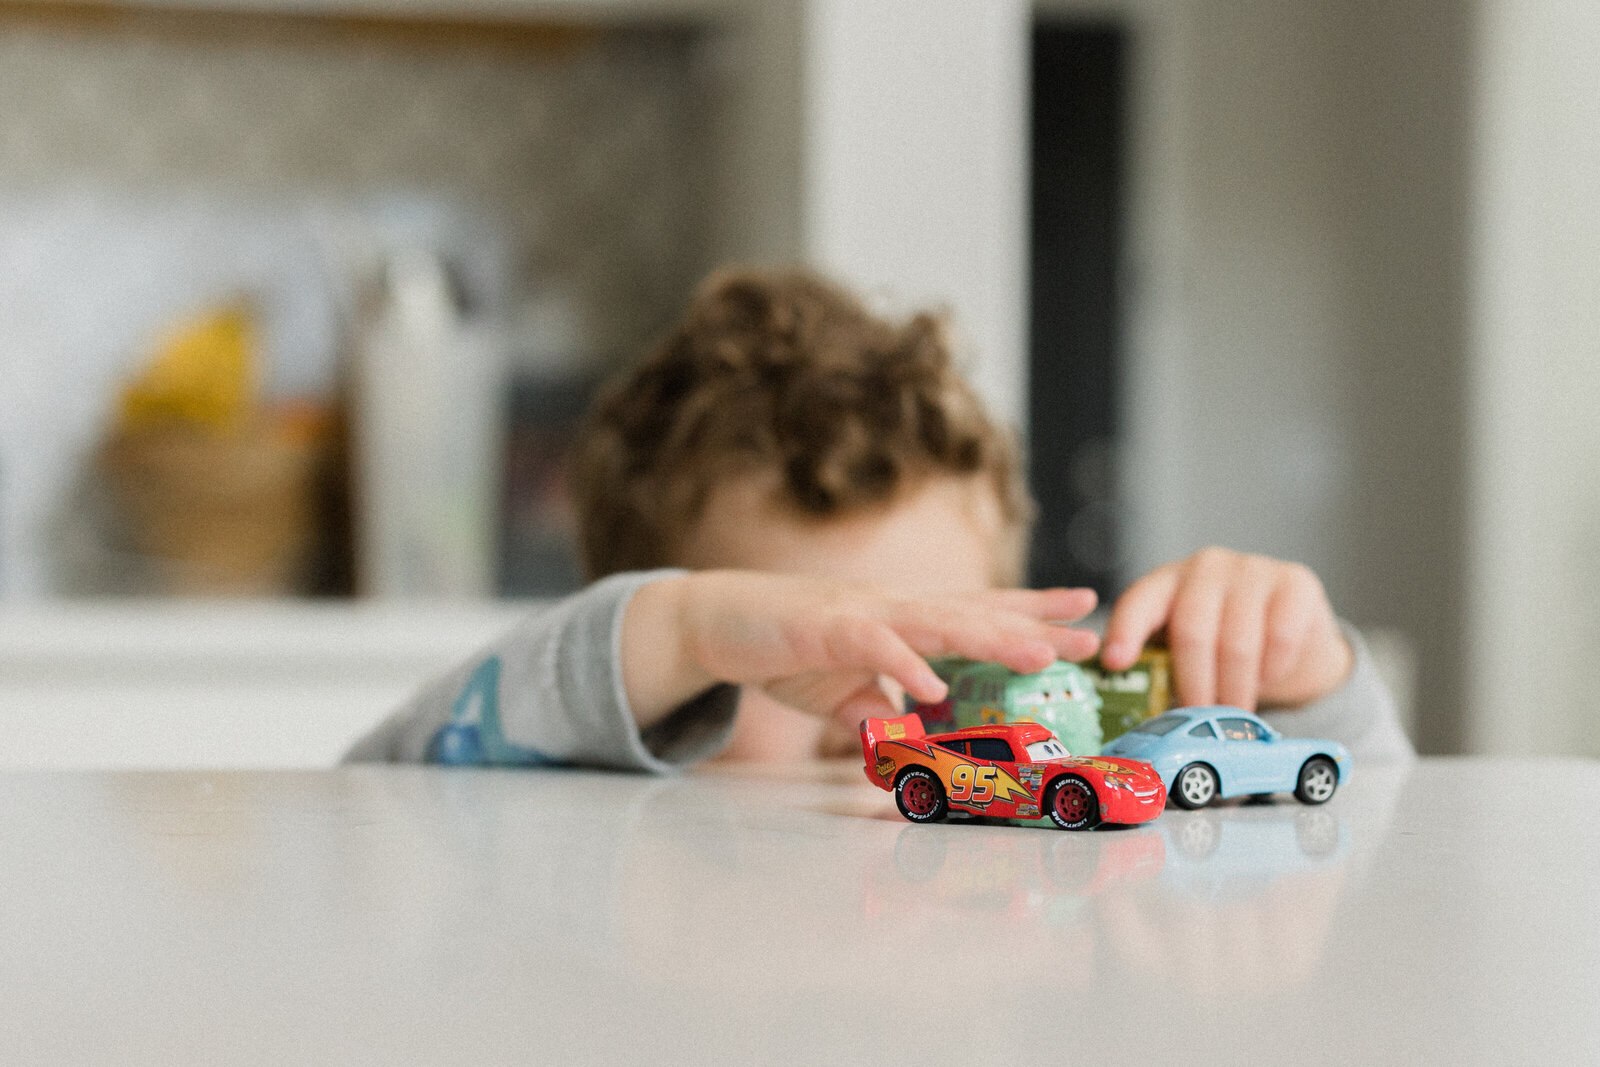 Little hands reach up onto the counter to grab toy cars